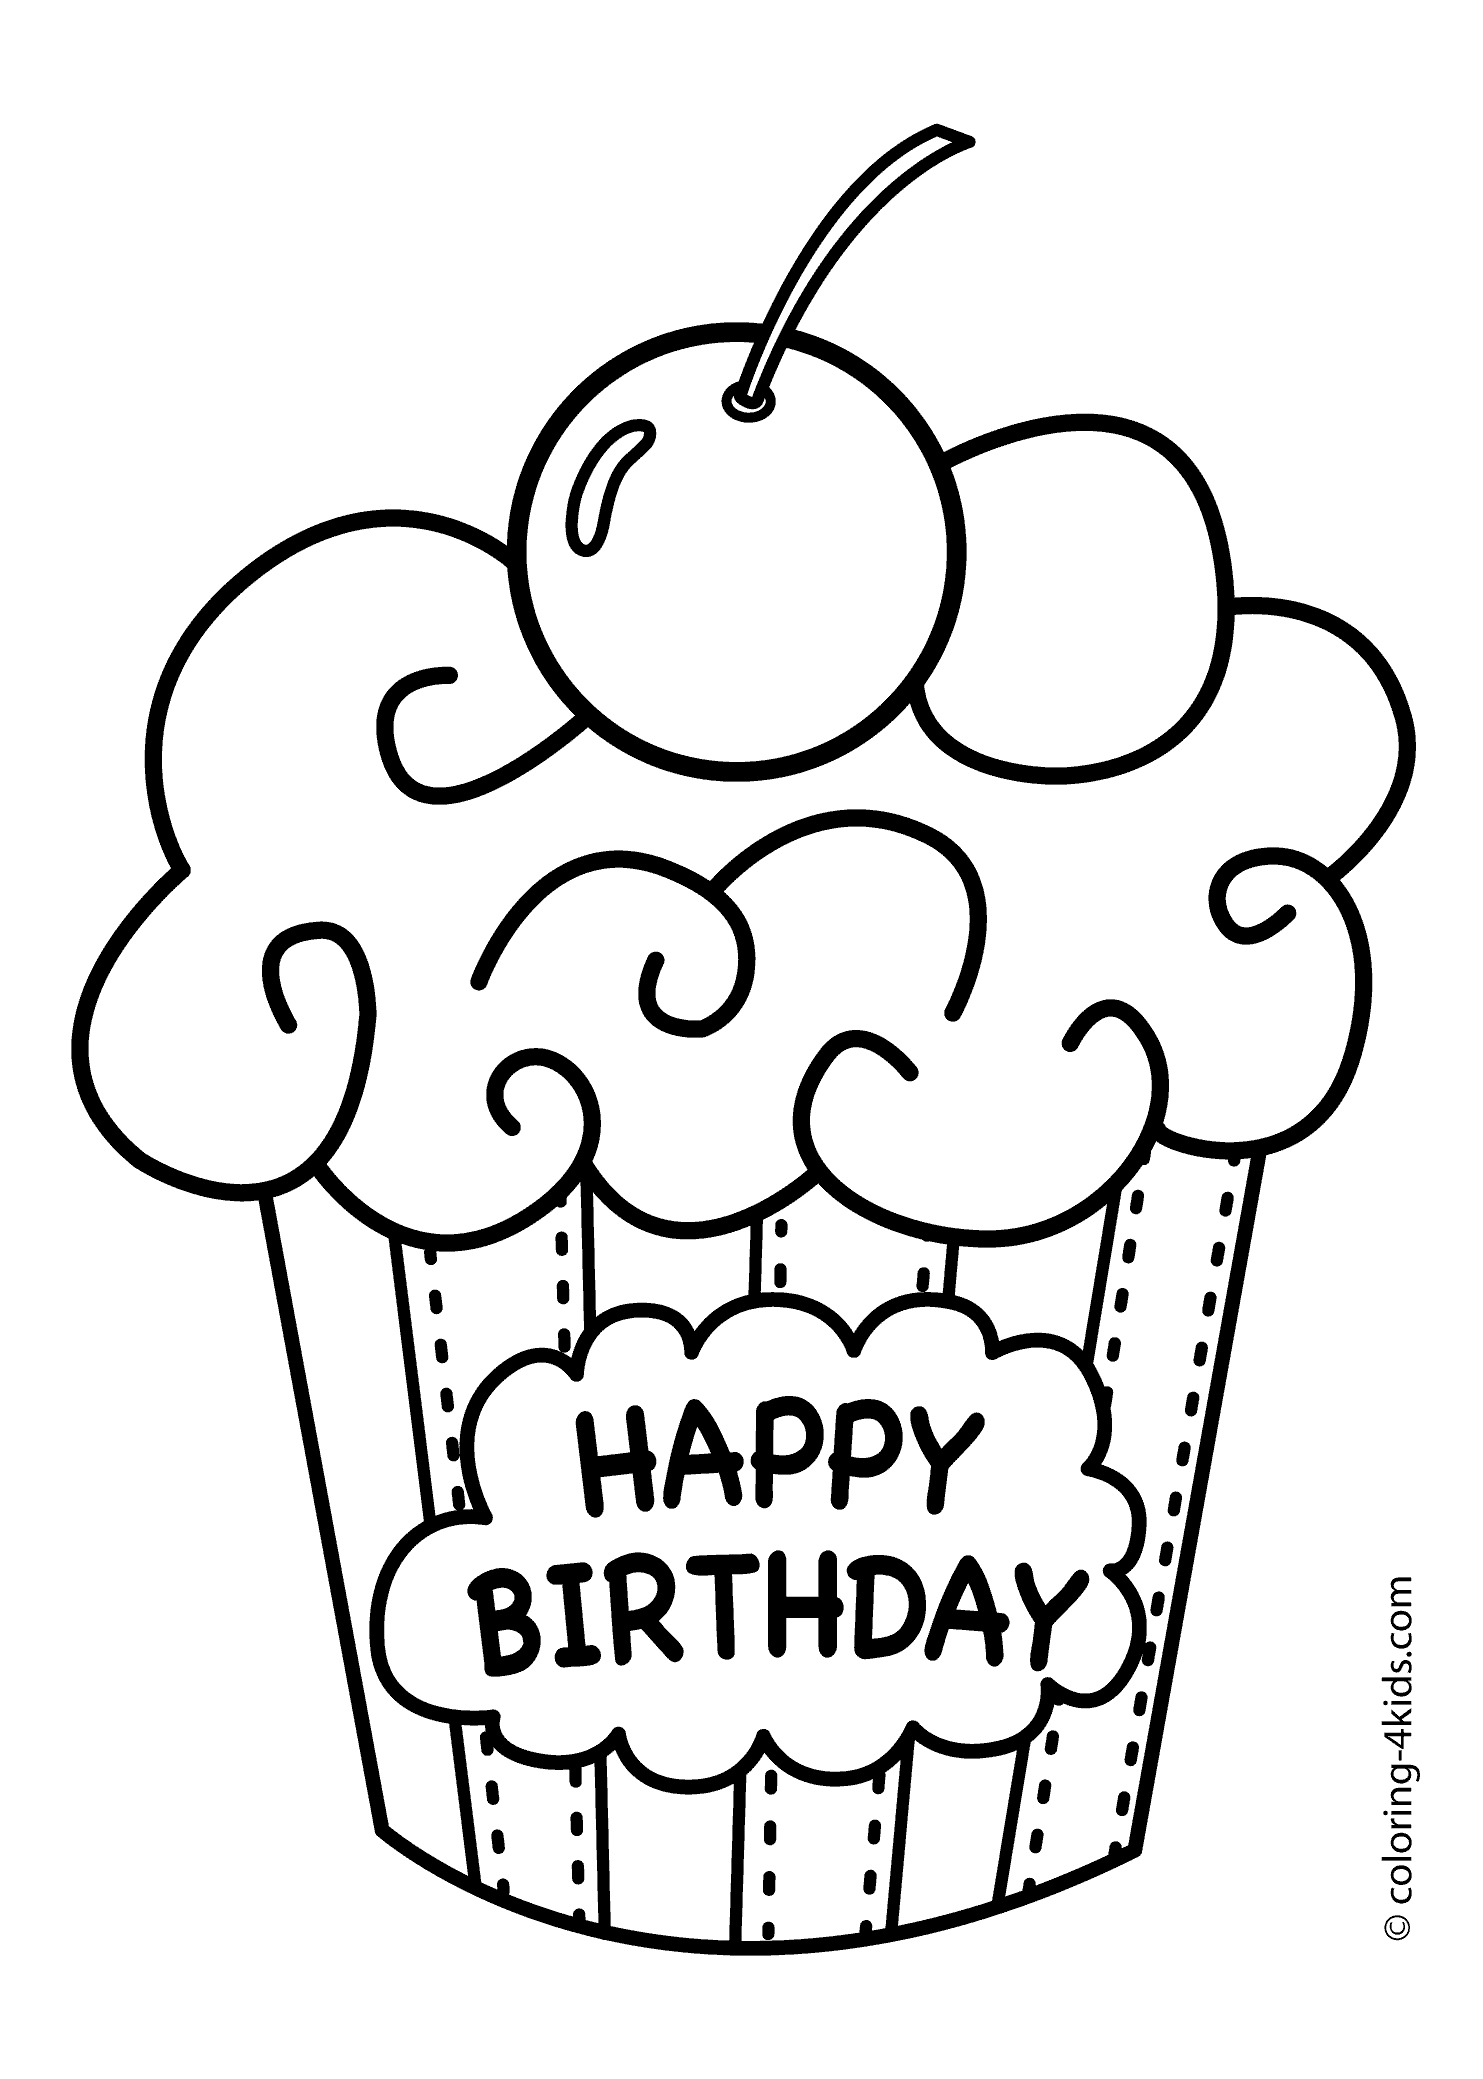 Cute Free Printable Birthday Coloring Pages with simple drawing